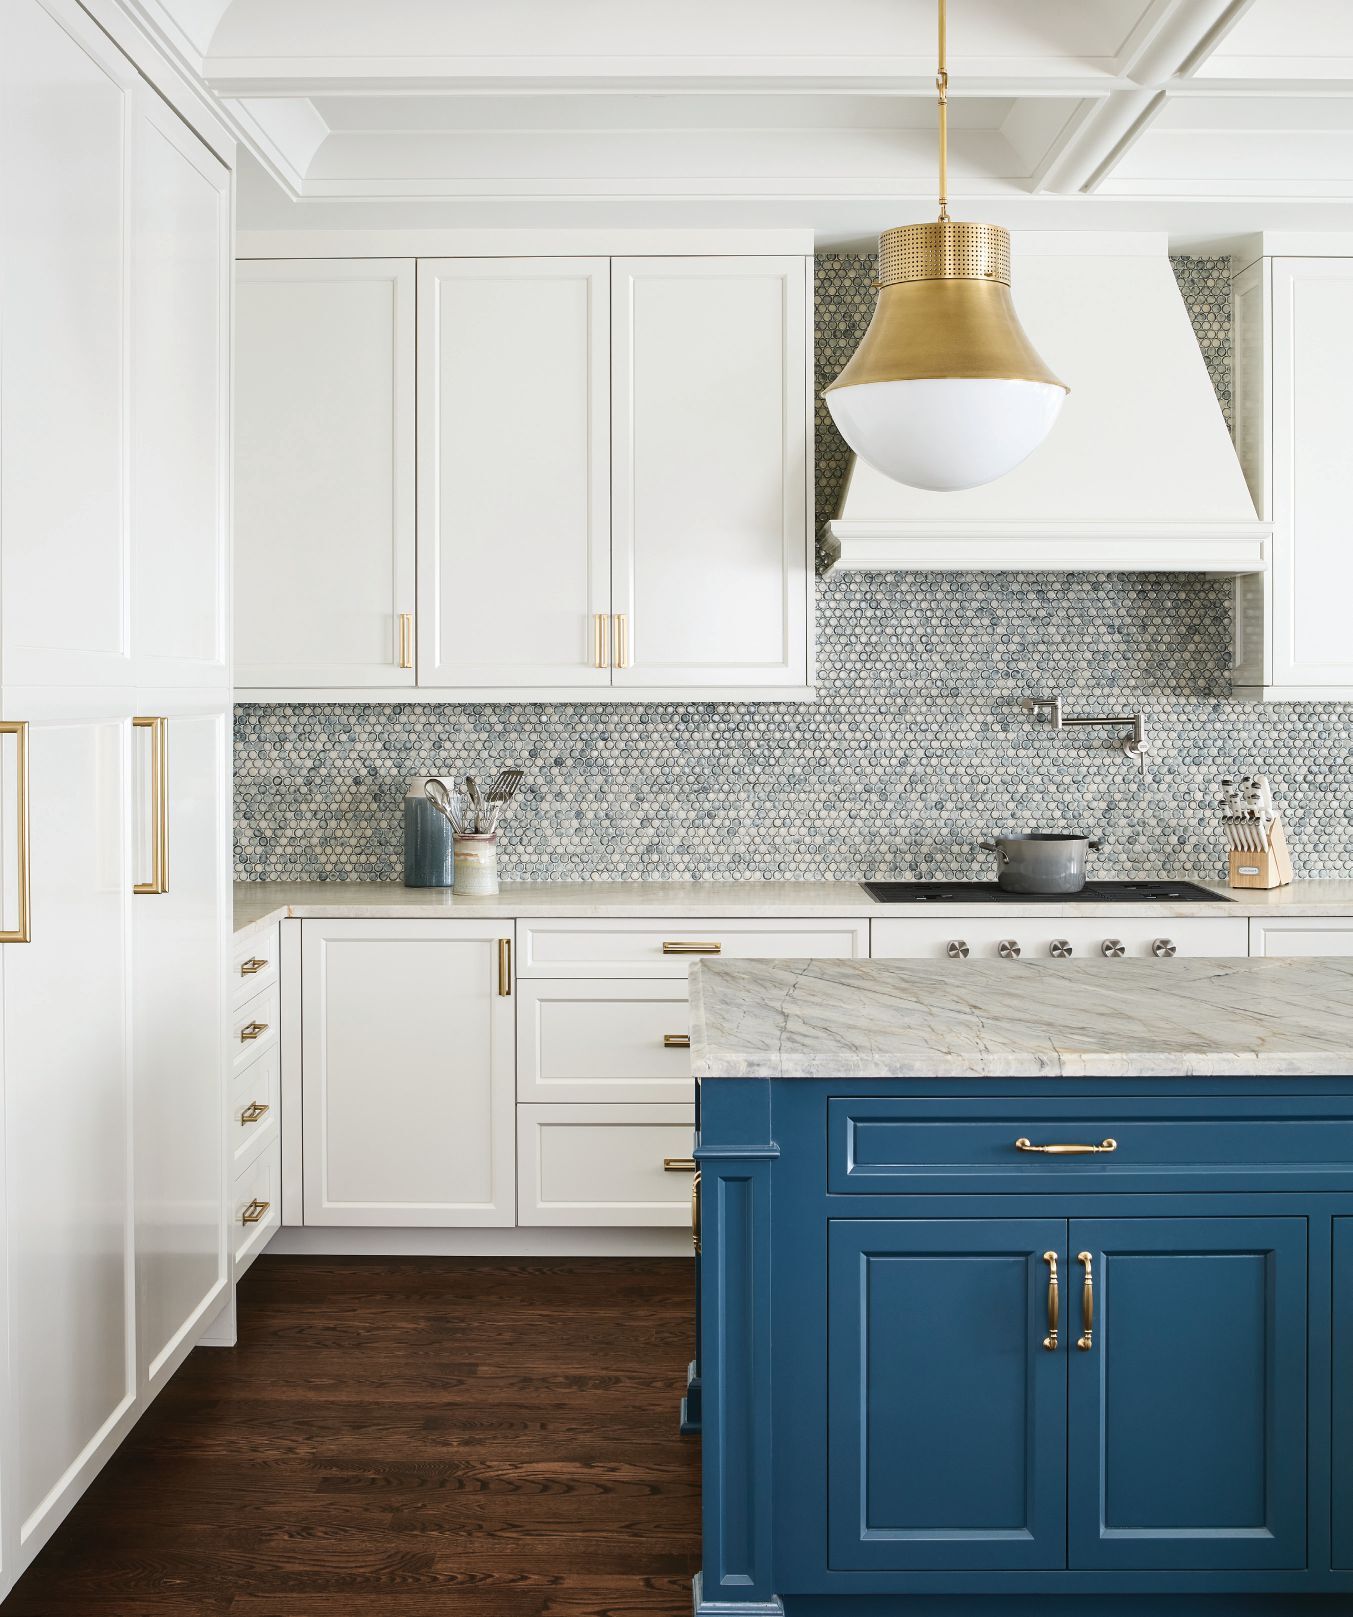 Custom backsplash tile by The Fine Line, Precision large pendant lights by Visual Comfort and island cabinets painted in Farrow & Ball’s striking Hague Blue make the kitchen pop.  Photographed by Ryan McDonald